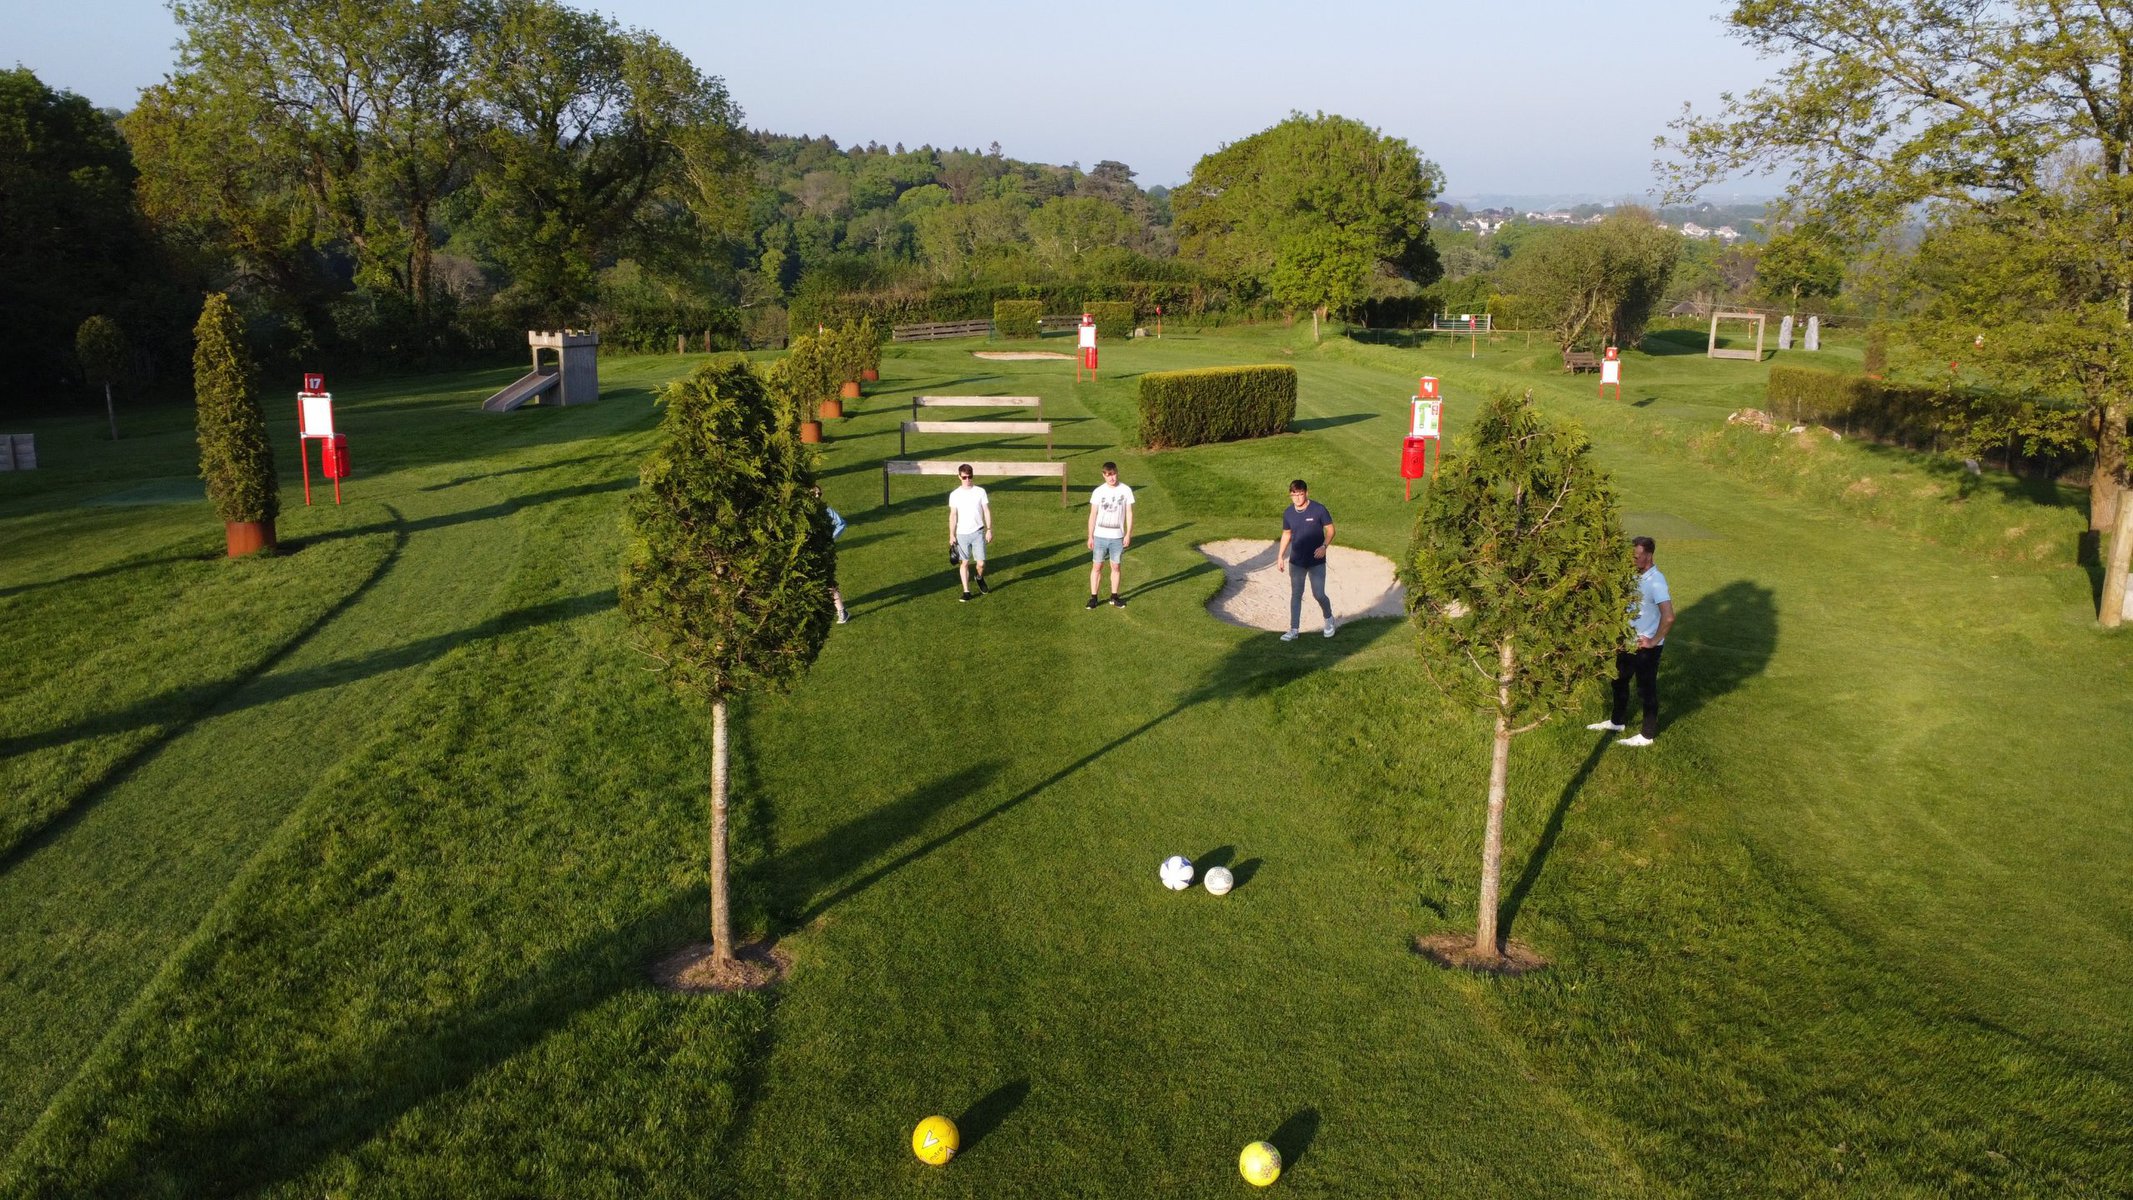 On the Fairway on parkland at Cornwall FootballGolf - The best outdoor attraction in Cornwall